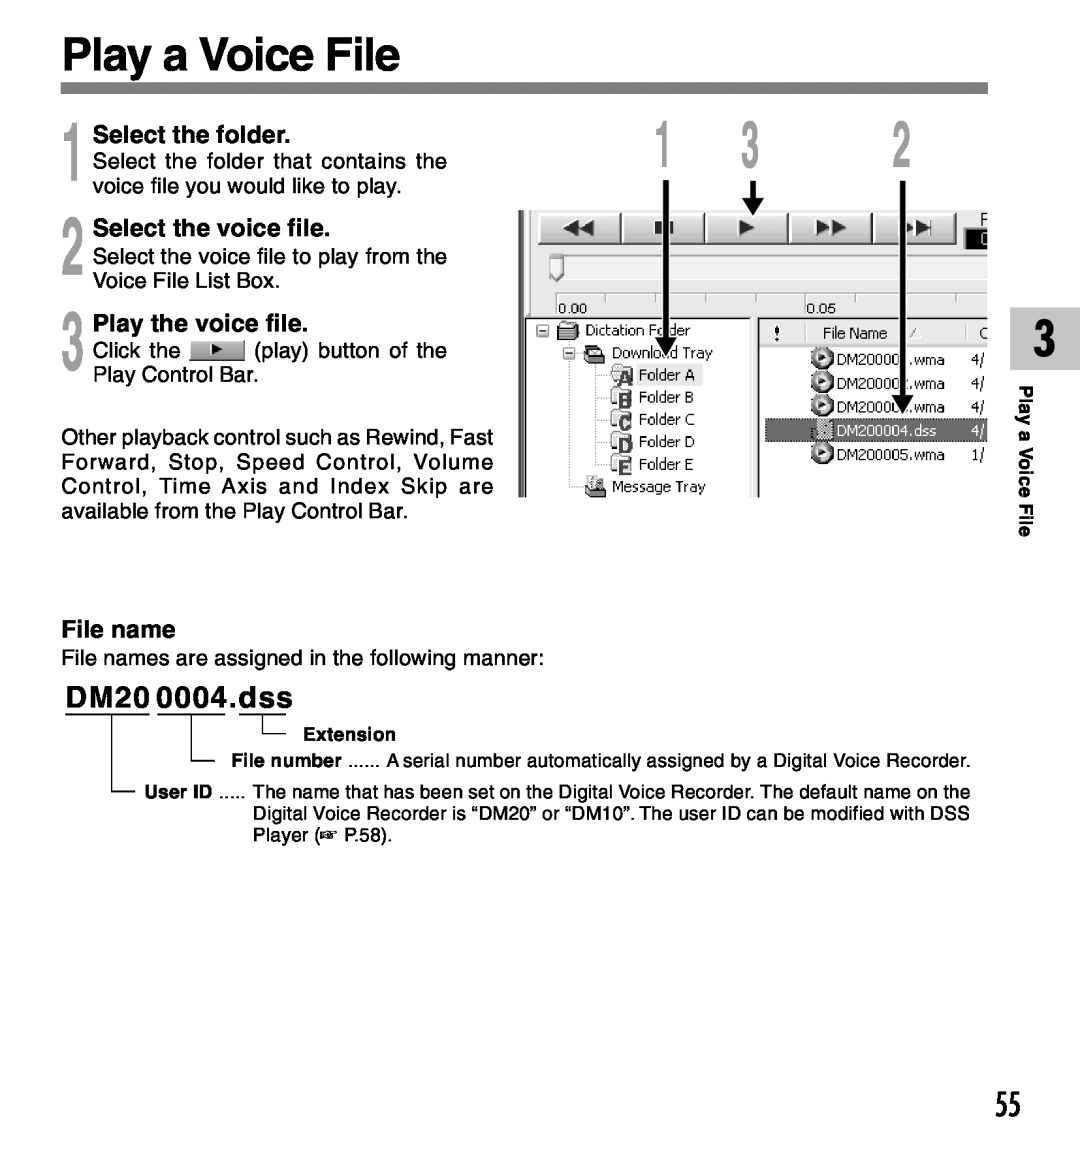 Olympus DM-20 Play a Voice File, DM20 0004.dss, Select the voice file, Play the voice file, File name, Select the folder 